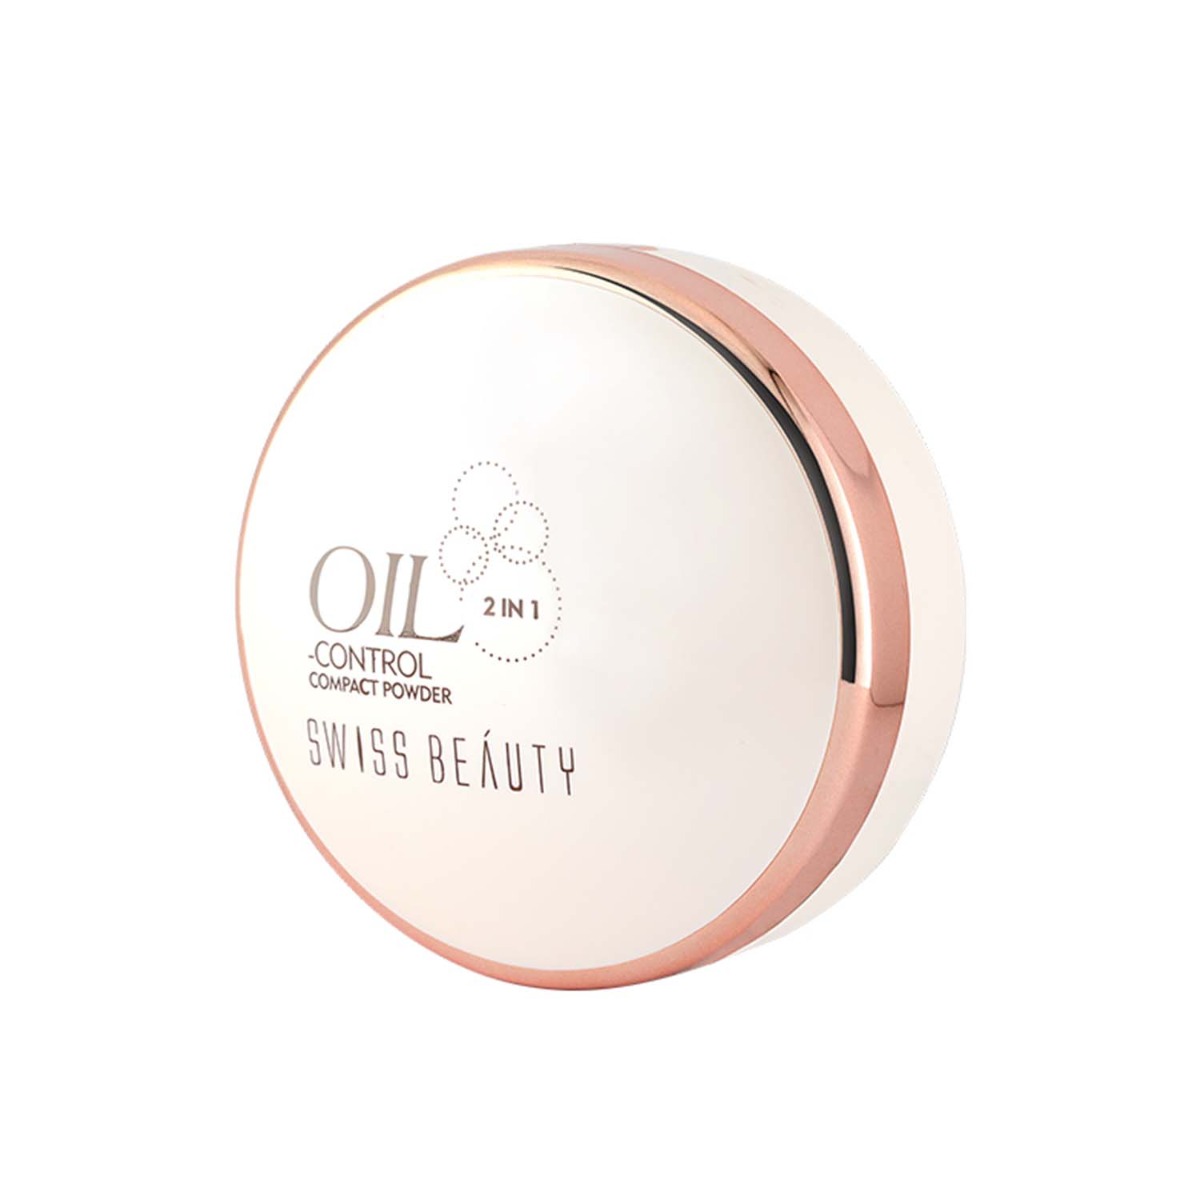 Swiss Beauty Oil Control Compact Powder - 03 Natural Nude, 20gm